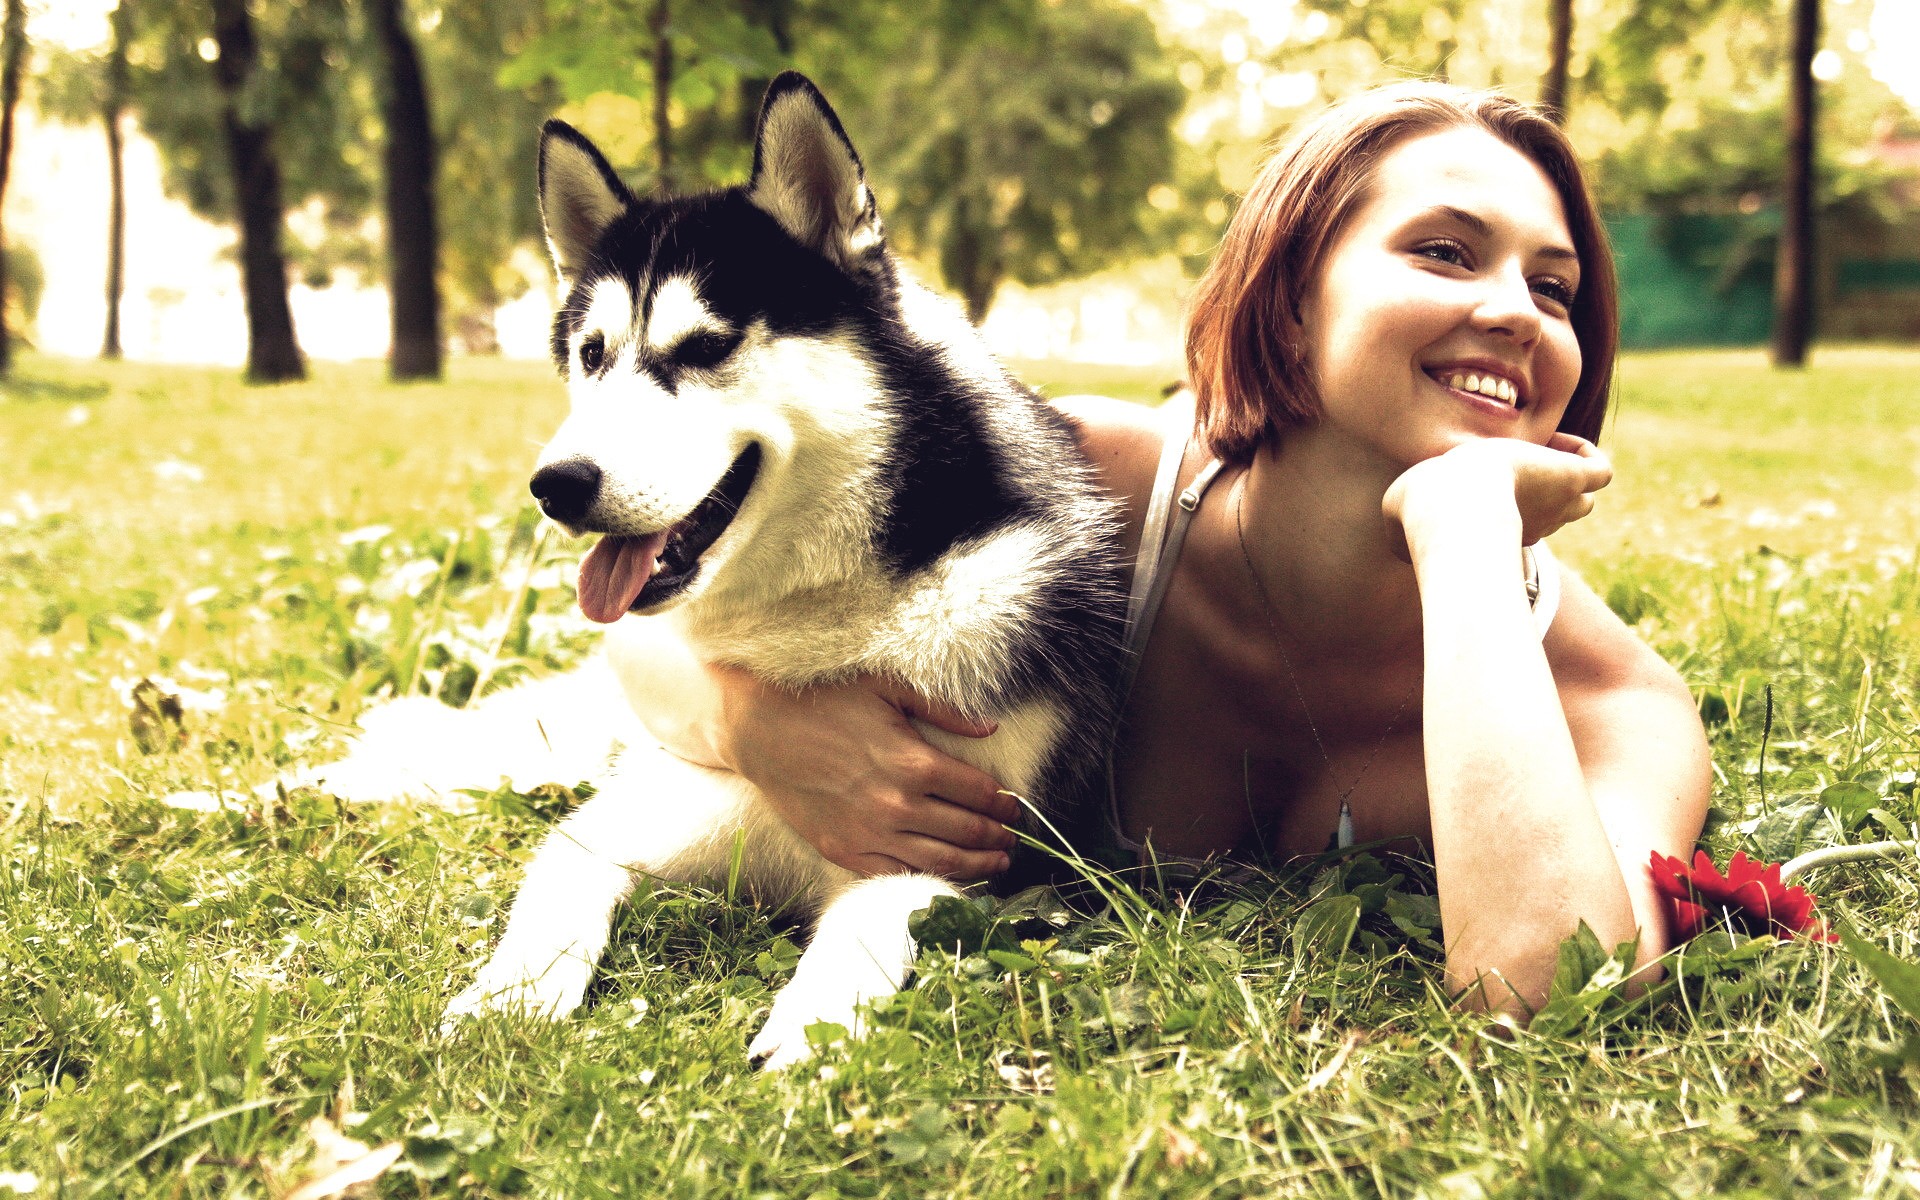 woman-her-dog-in-park-250141